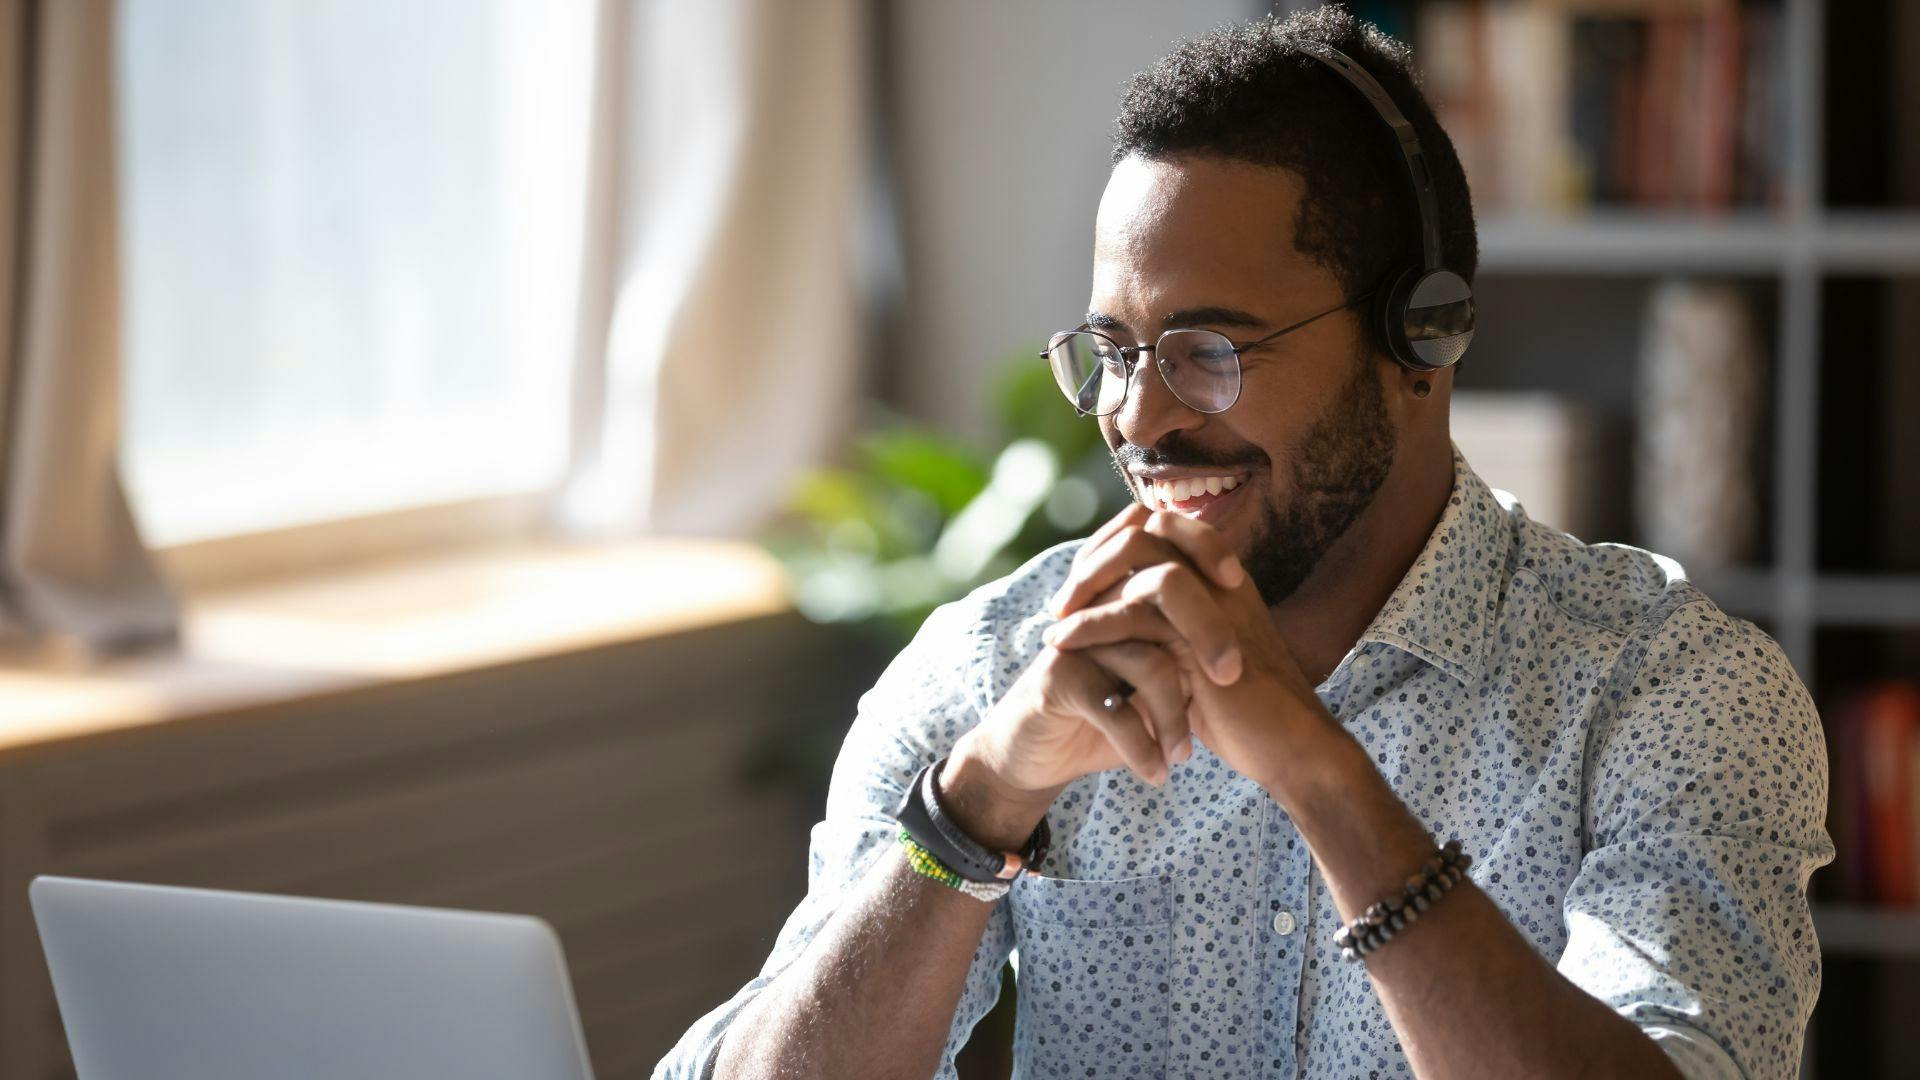 remote worker wearing headphones and smiling in front of their laptop